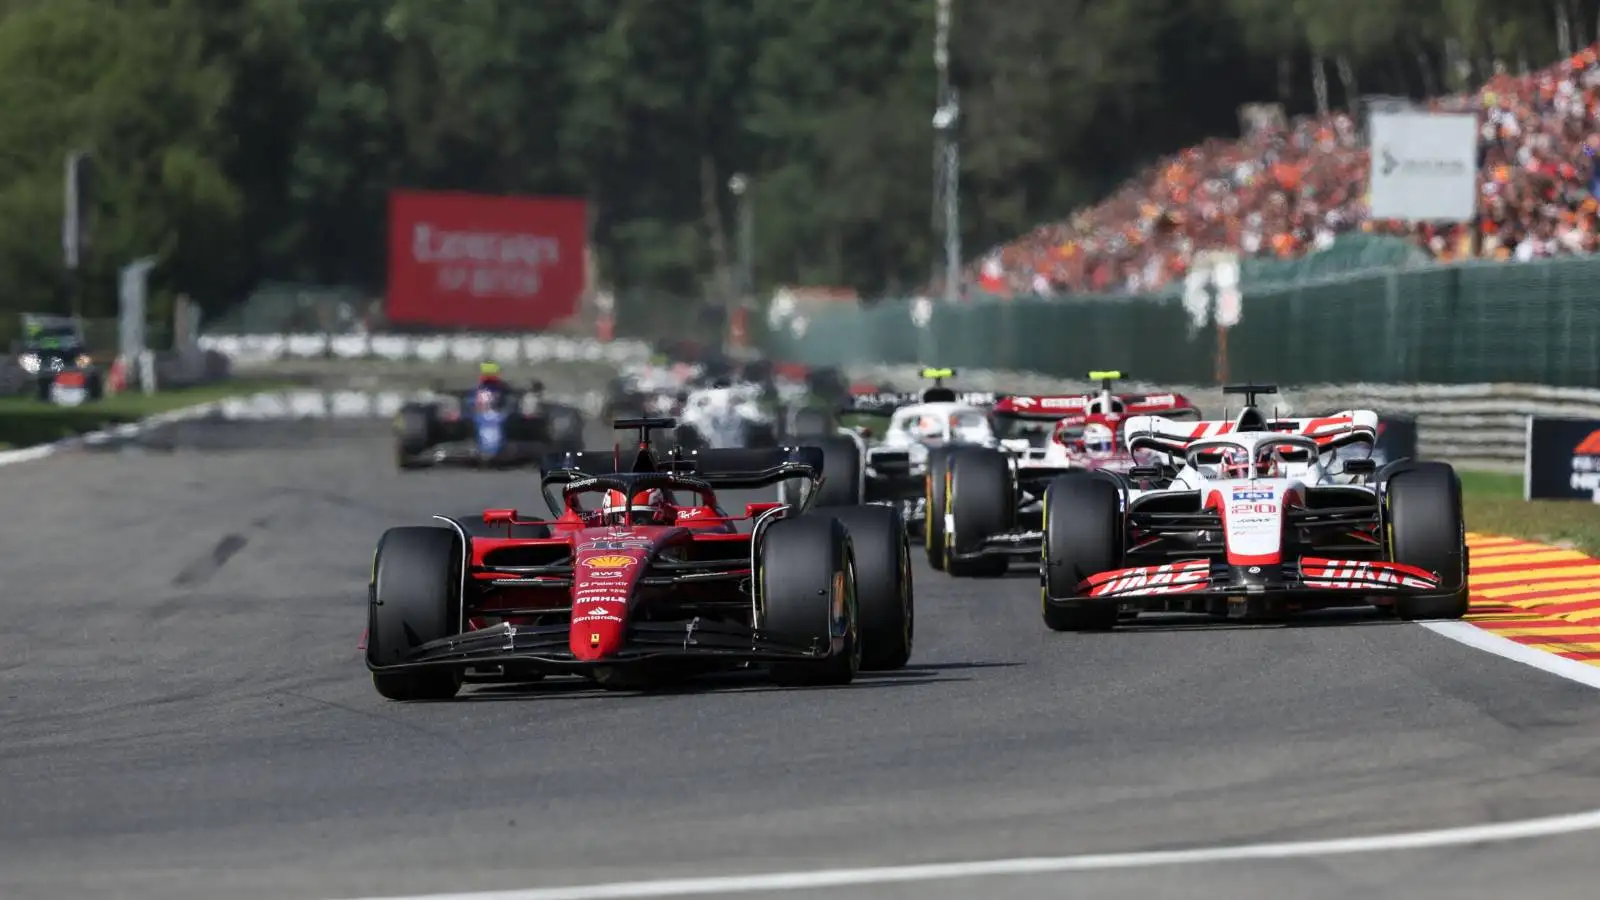 Charles Leclerc just ahead of a Haas. Spa-Francorchamps August 2022.